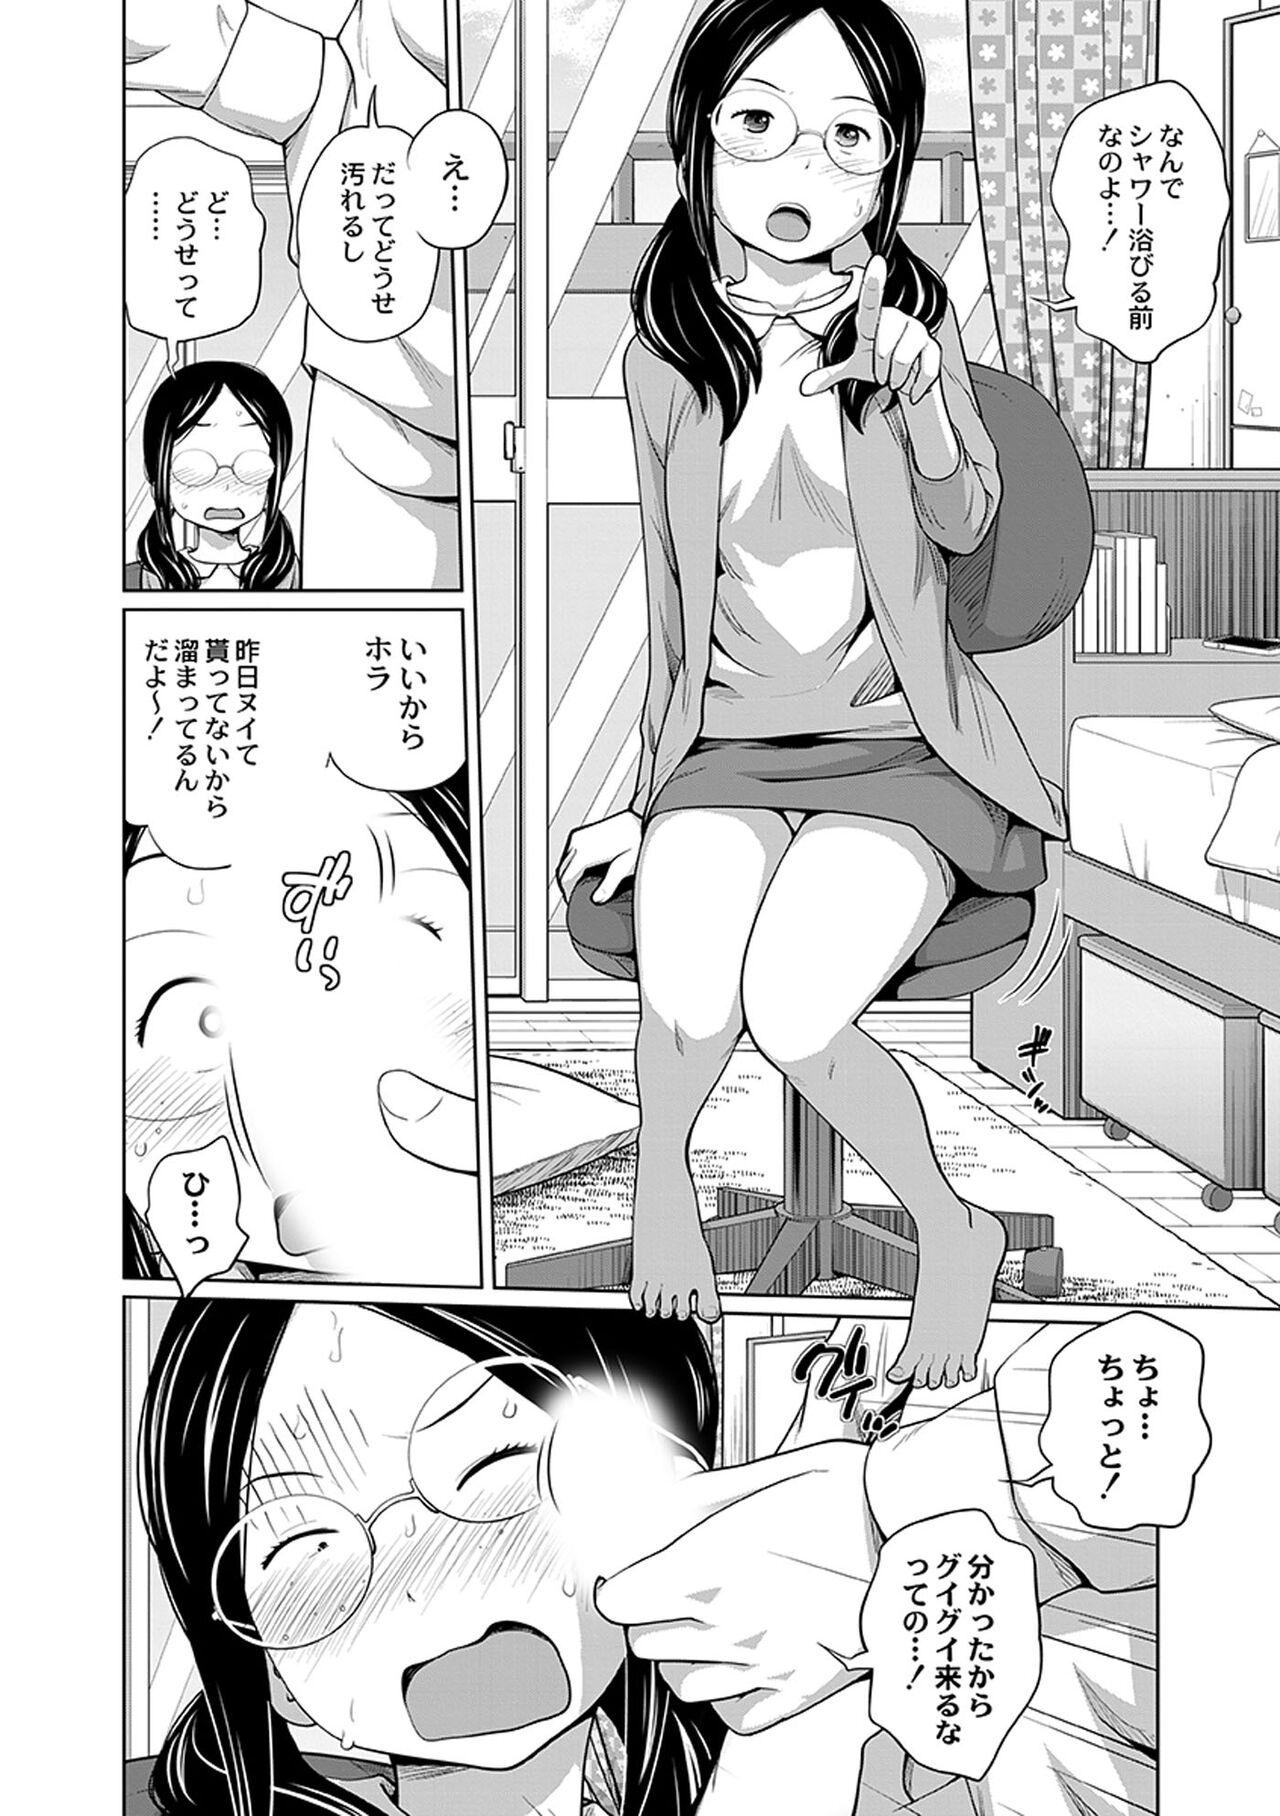 Mexico Ane Megane - spectacled sister Amateurs - Page 6